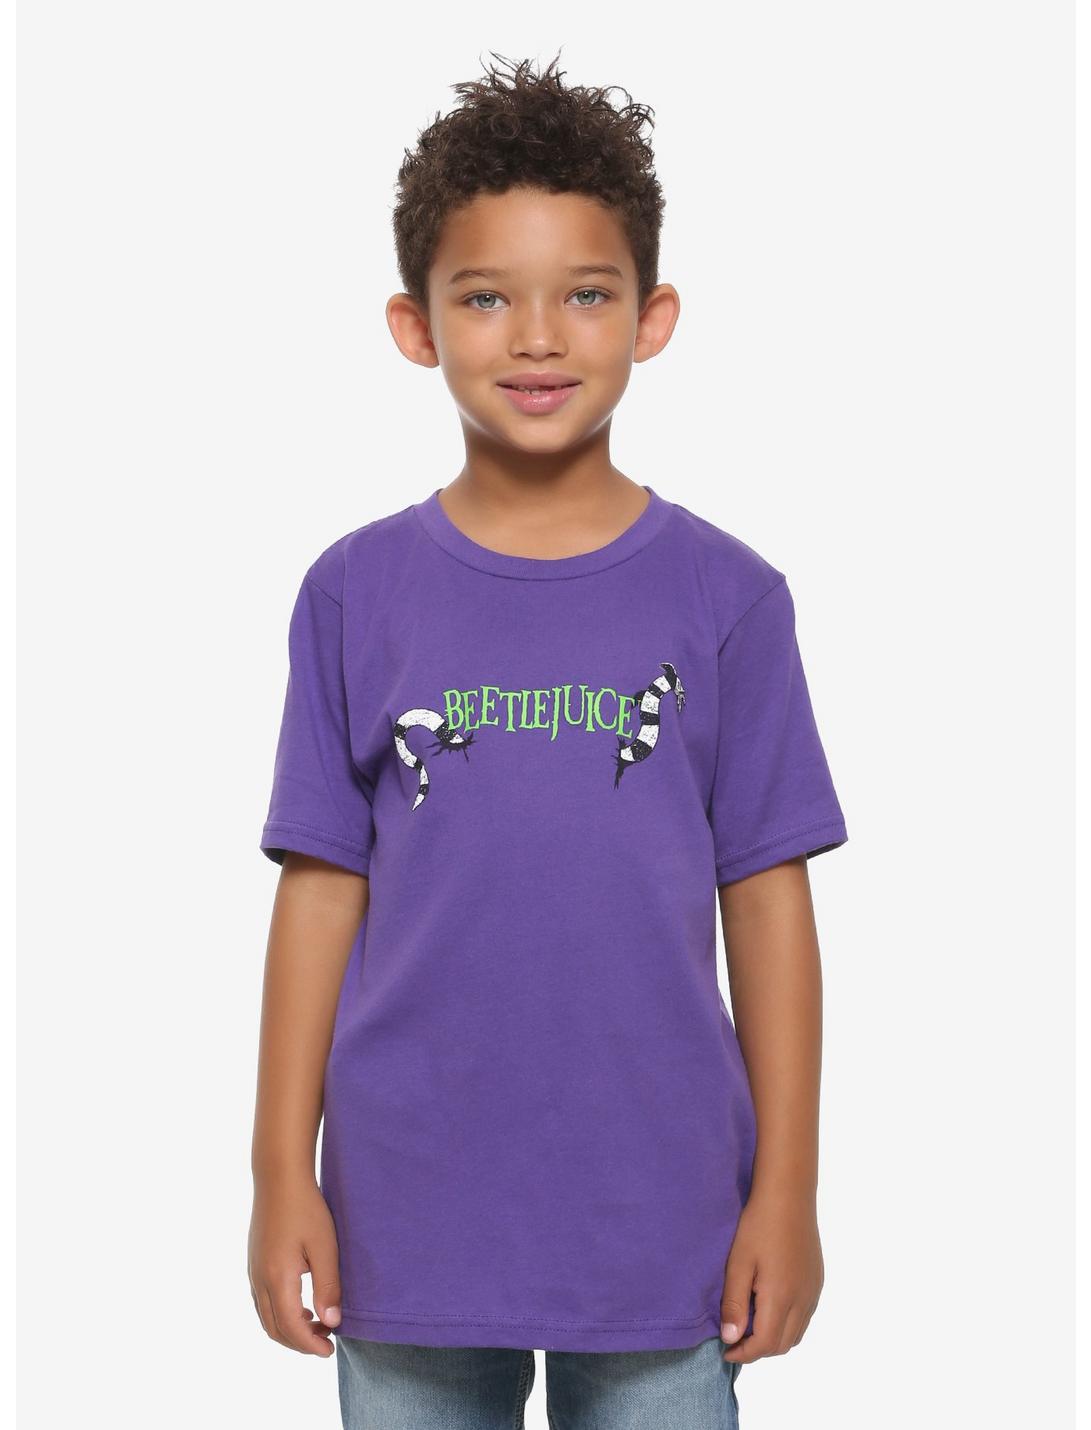 Beetlejuice Sandworm Logo Youth T-Shirt - BoxLunch Exclusive, PURPLE, hi-res